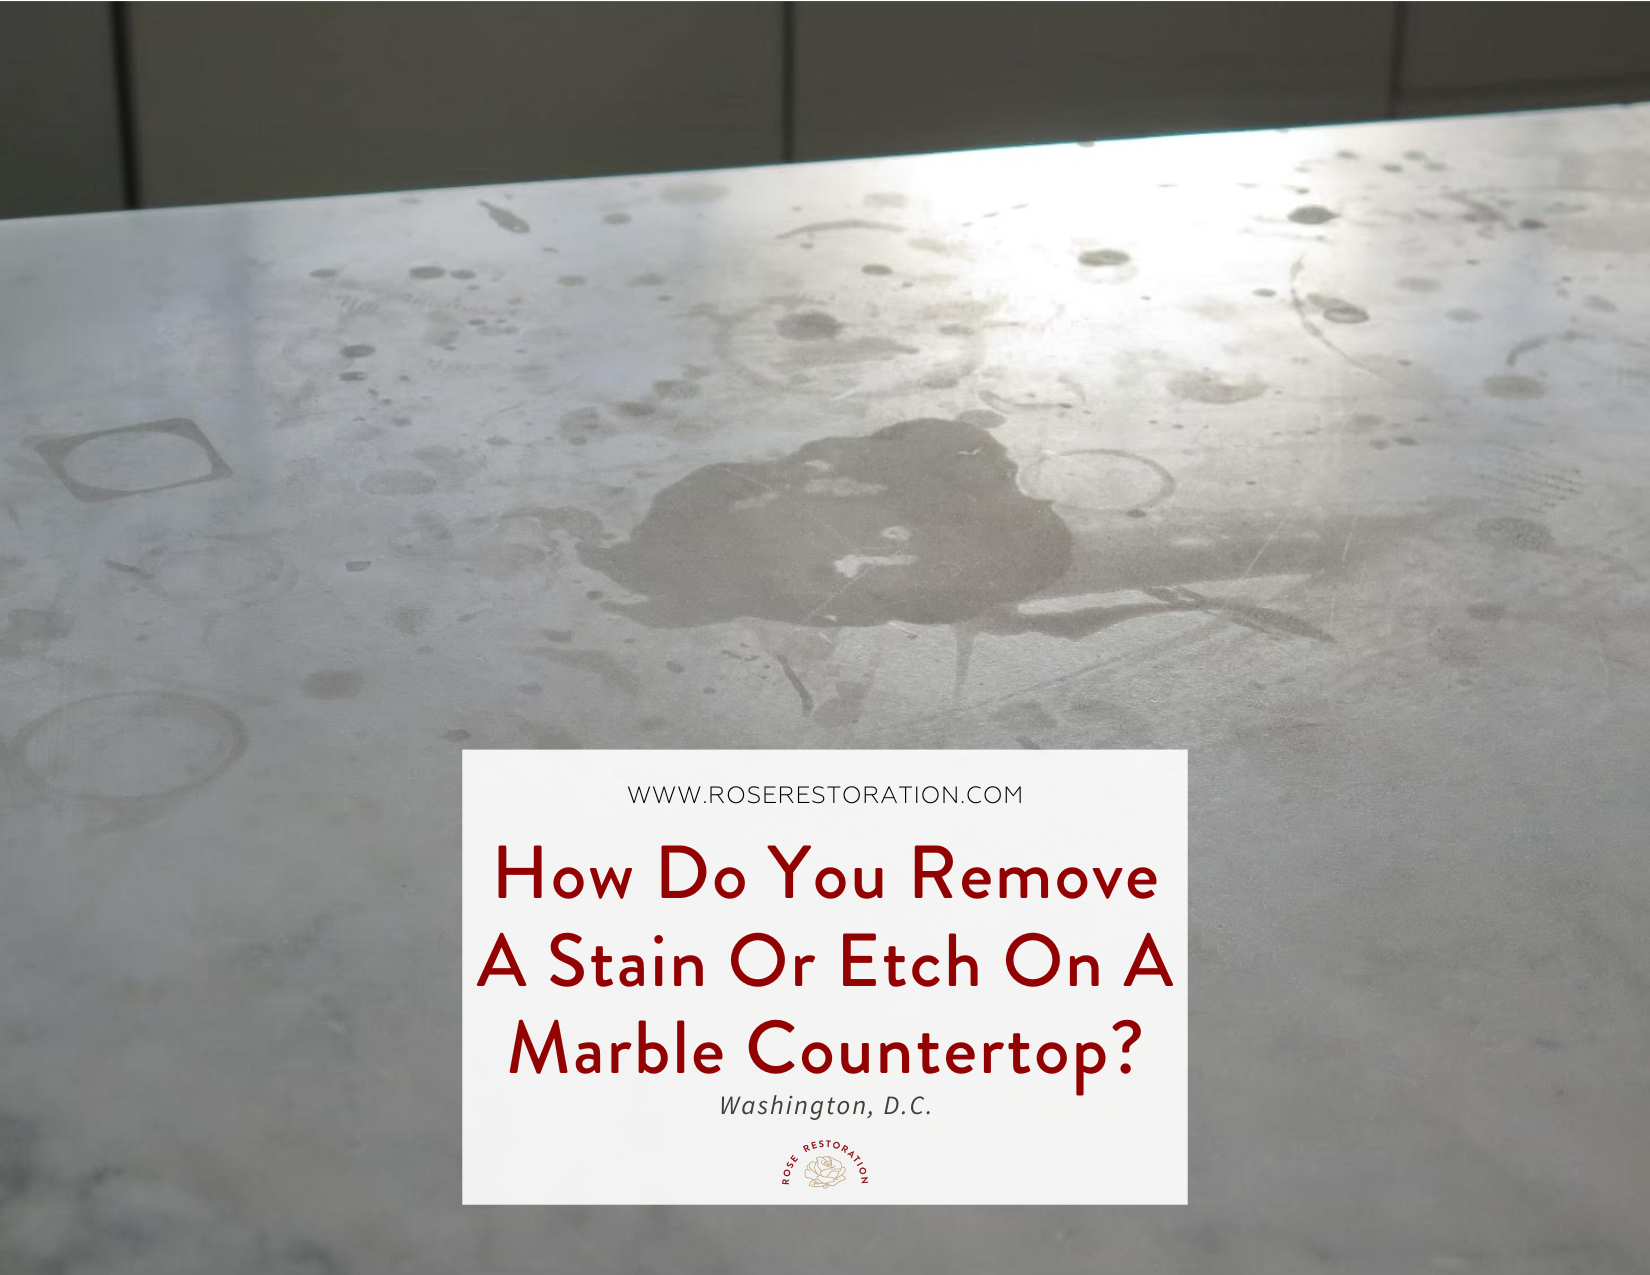 How Do You Remove A Stain Or Etch On A Marble Countertop?